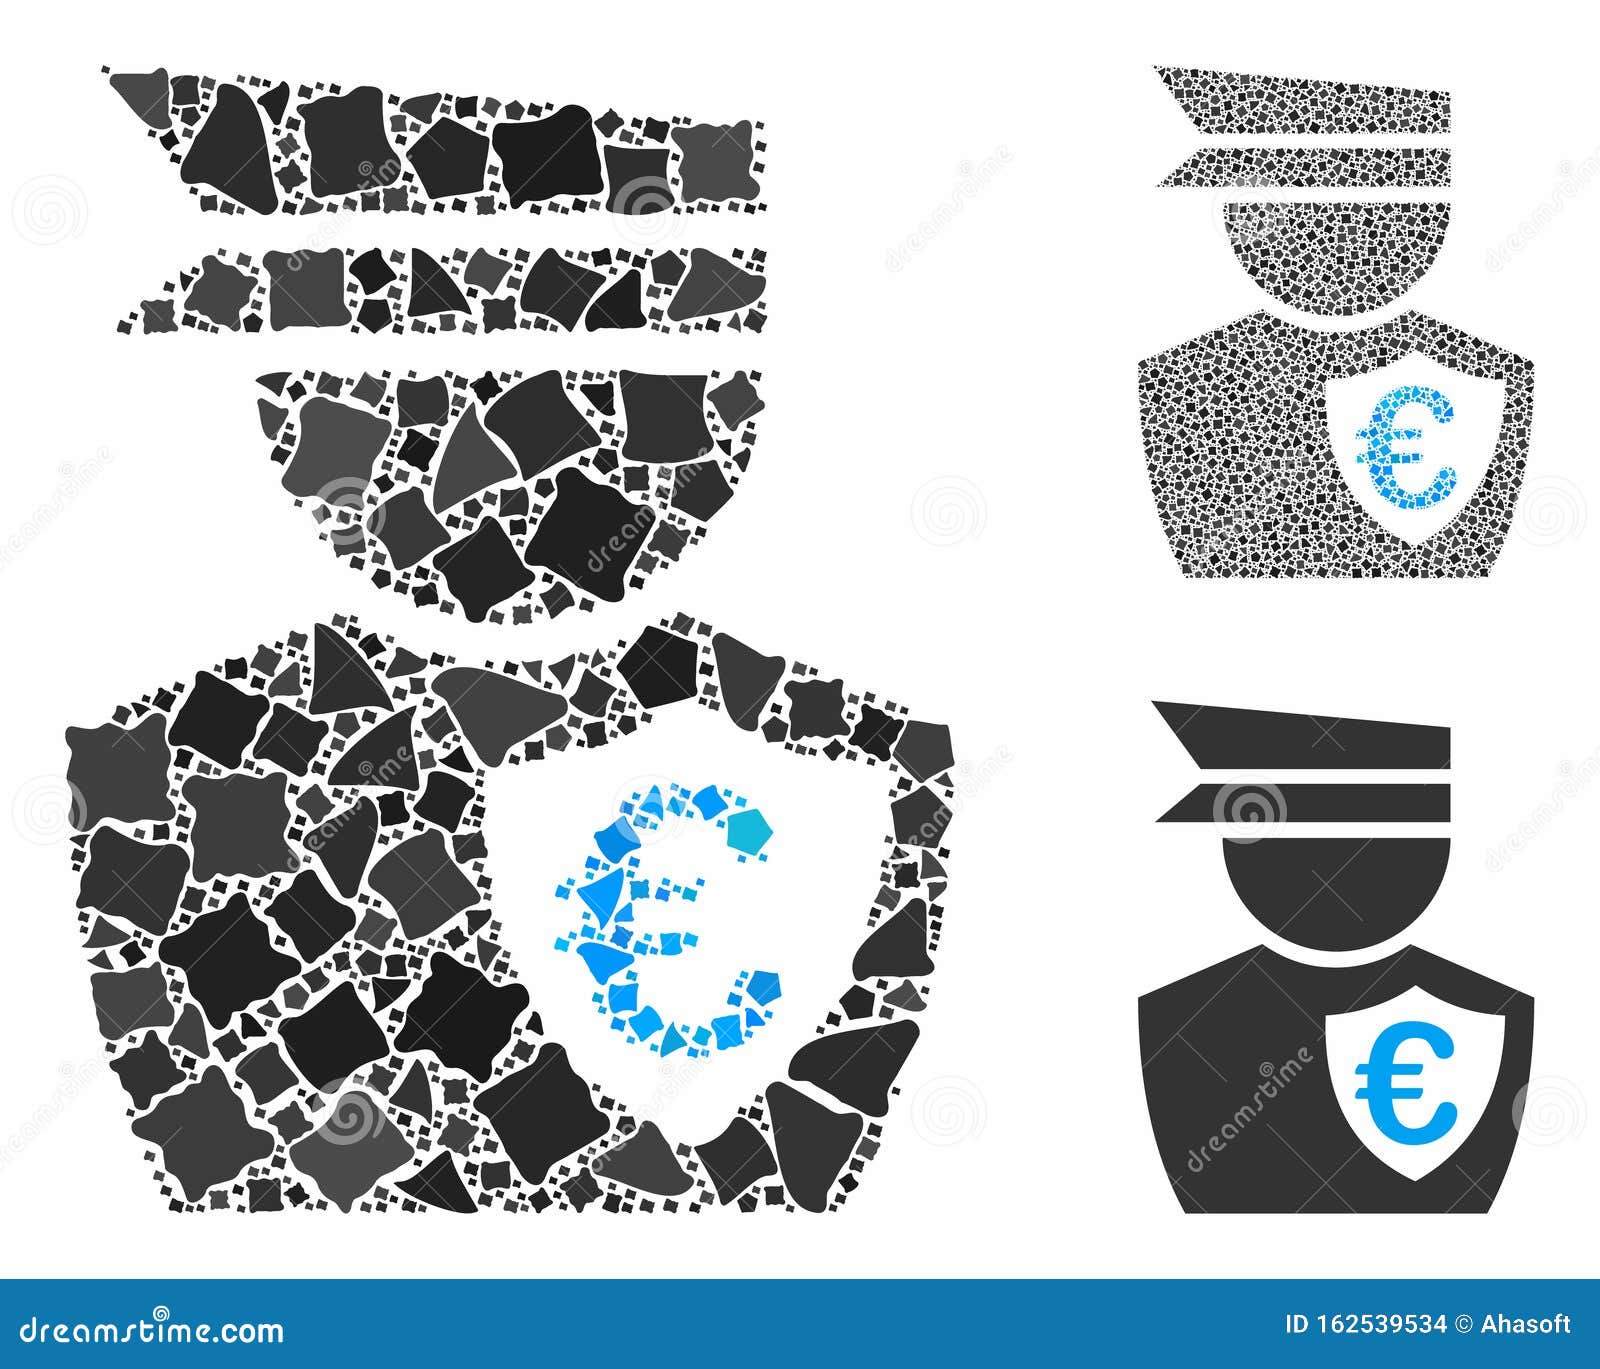 euro commissioner composition icon of irregular pieces